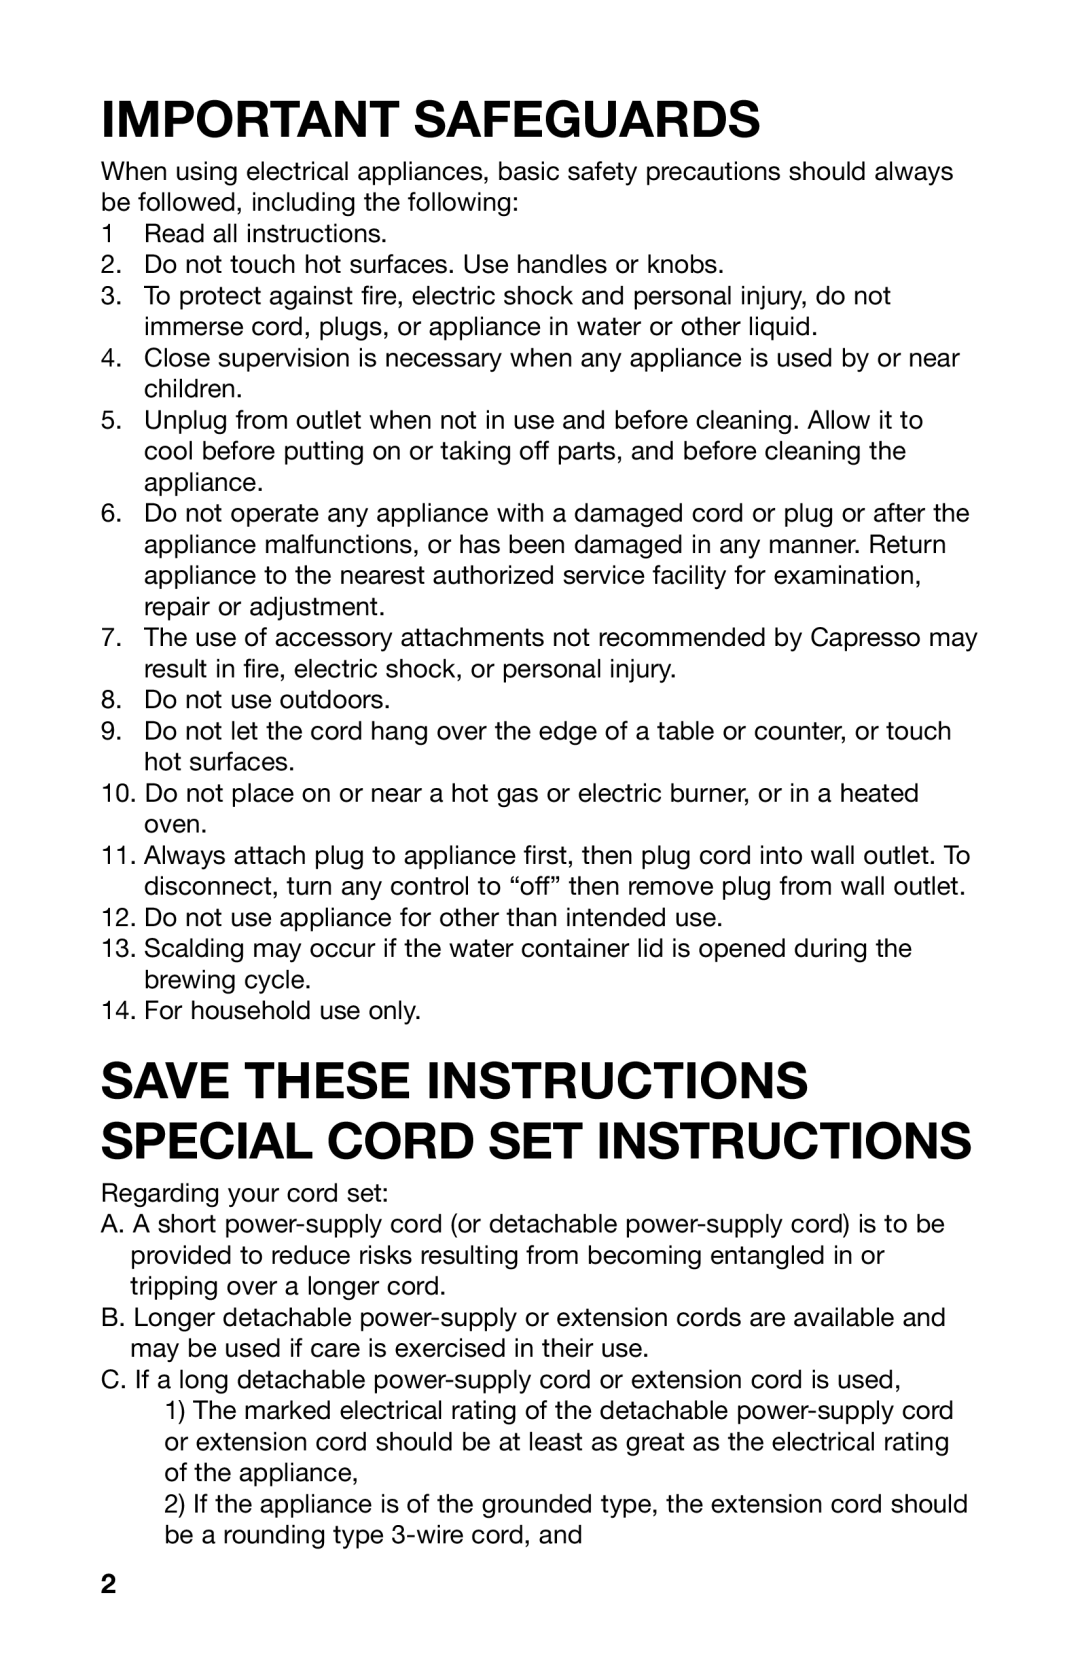 Capresso CM200 warranty Important Safeguards, Save These Instructions Special Cord Set Instructions 